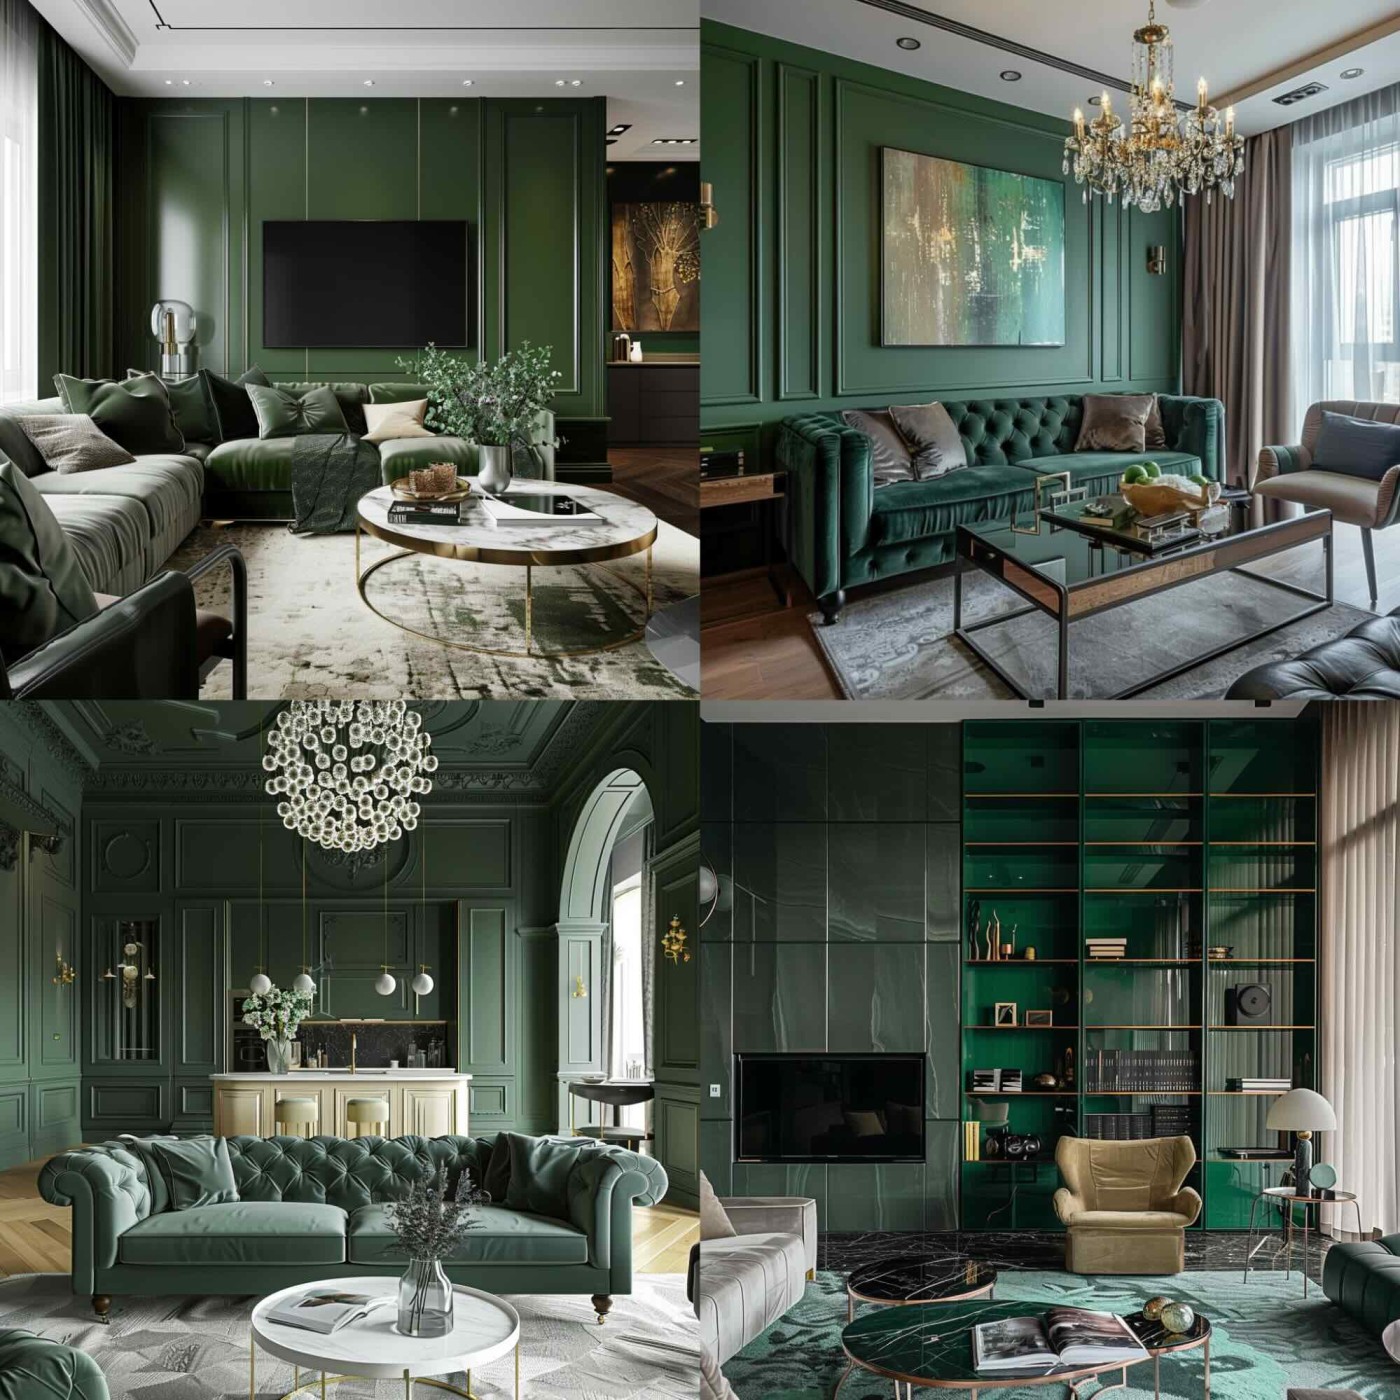 A living room in a luxury apartment, forest green